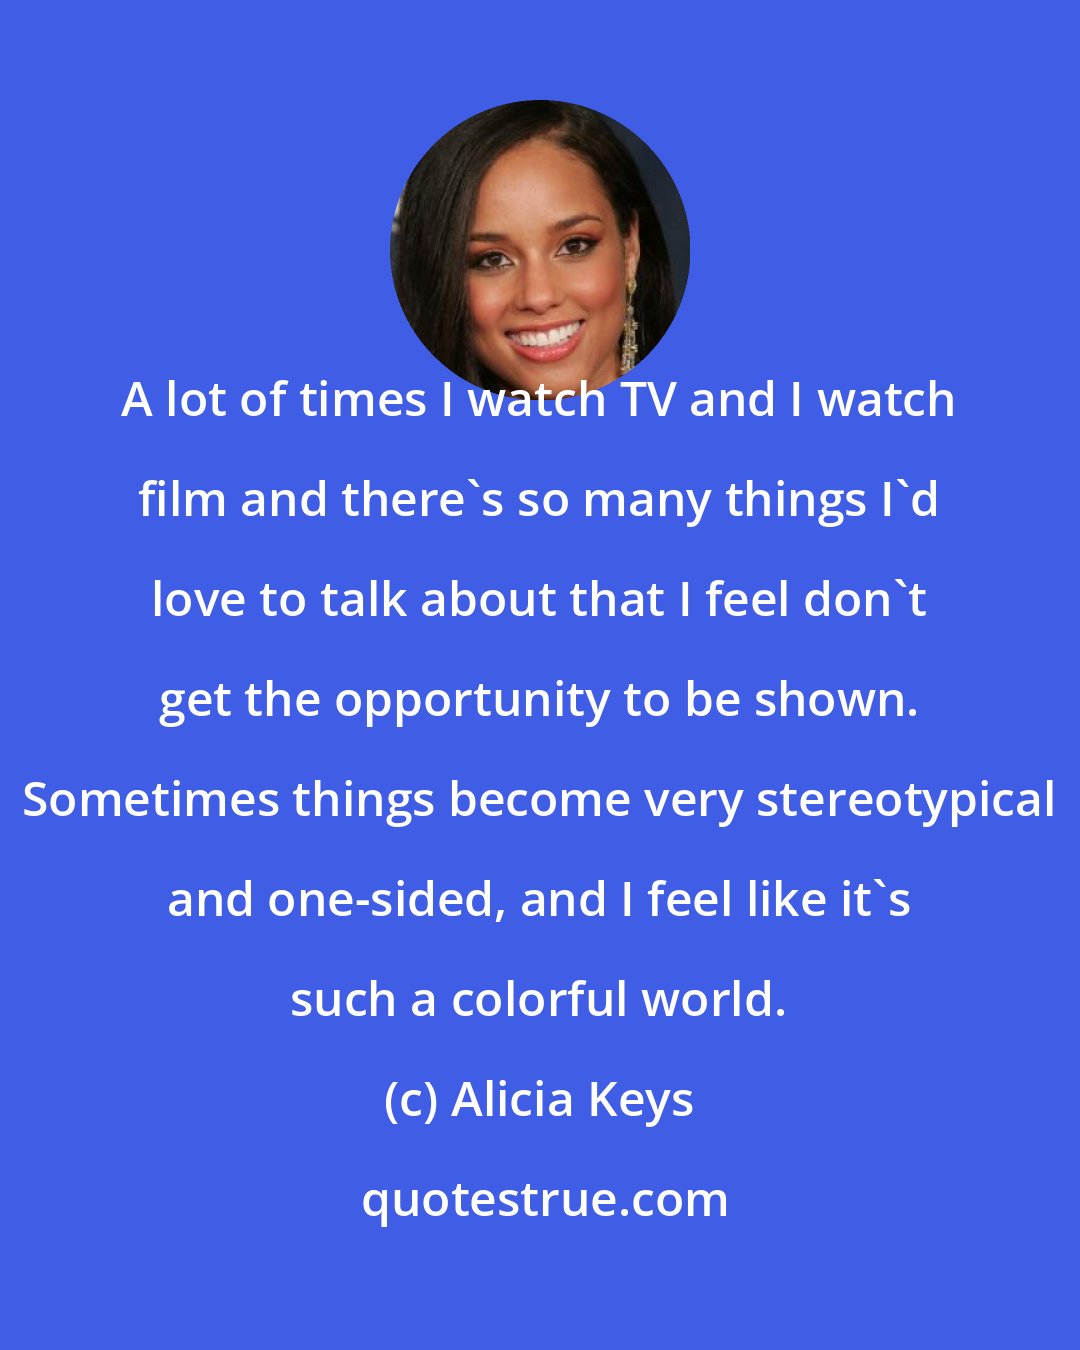 Alicia Keys: A lot of times I watch TV and I watch film and there's so many things I'd love to talk about that I feel don't get the opportunity to be shown. Sometimes things become very stereotypical and one-sided, and I feel like it's such a colorful world.